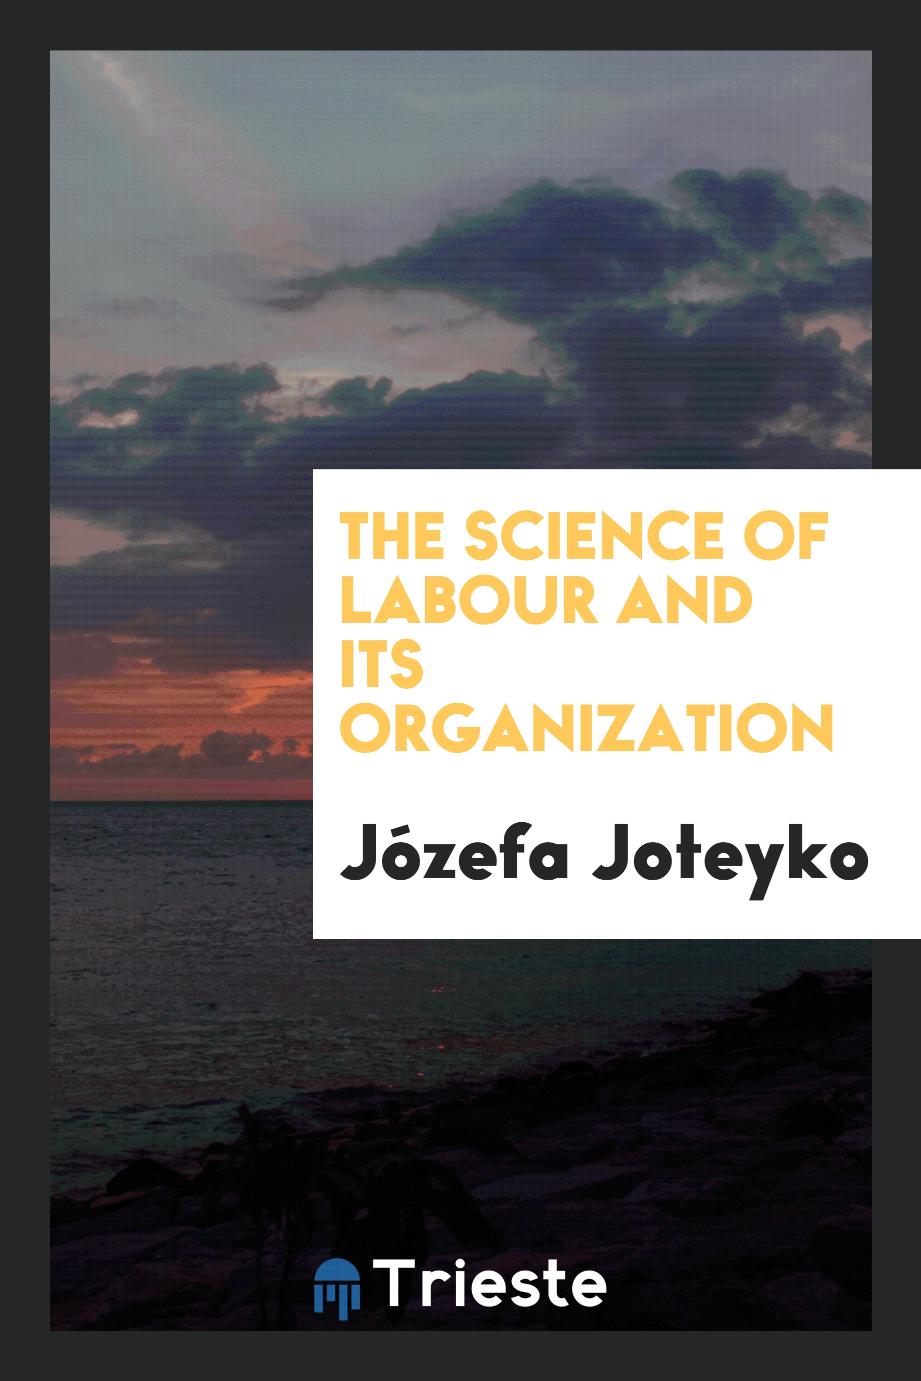 The science of labour and its organization